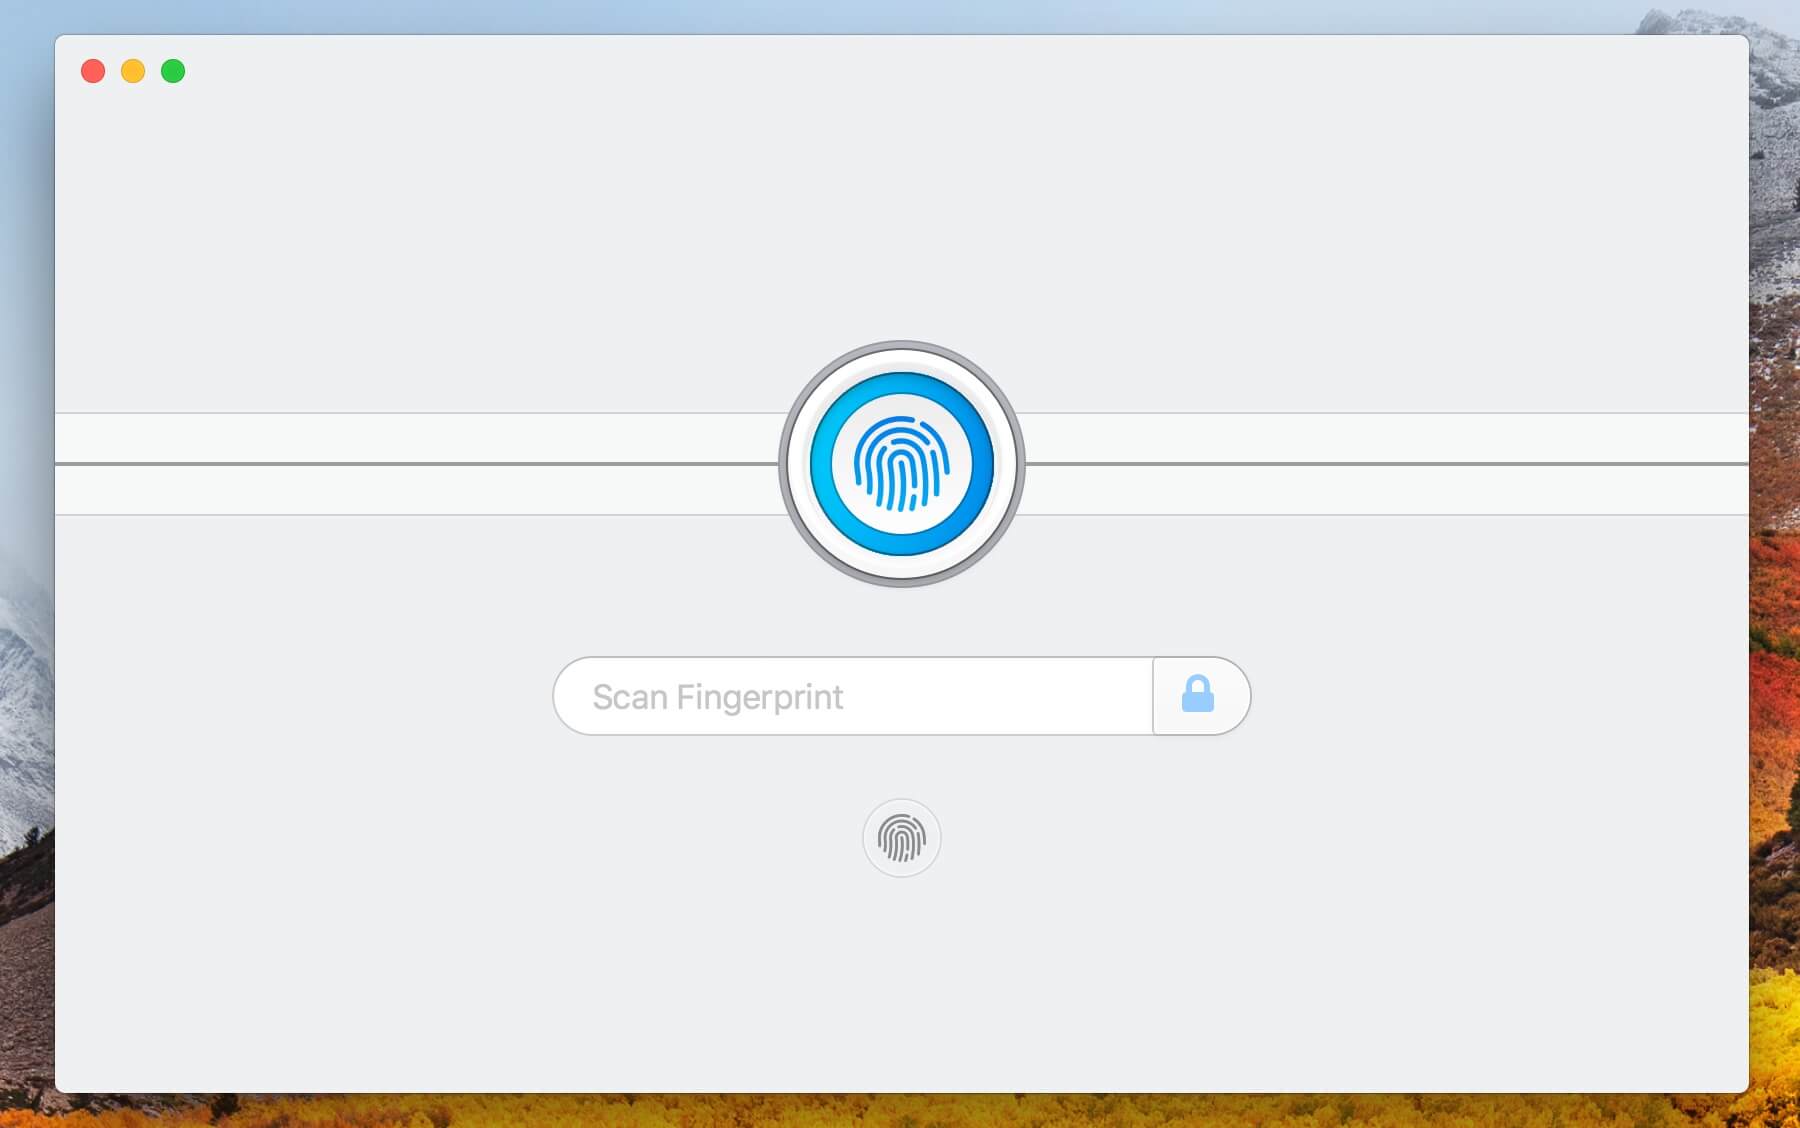 1Password locked and ready to unlock using Touch ID